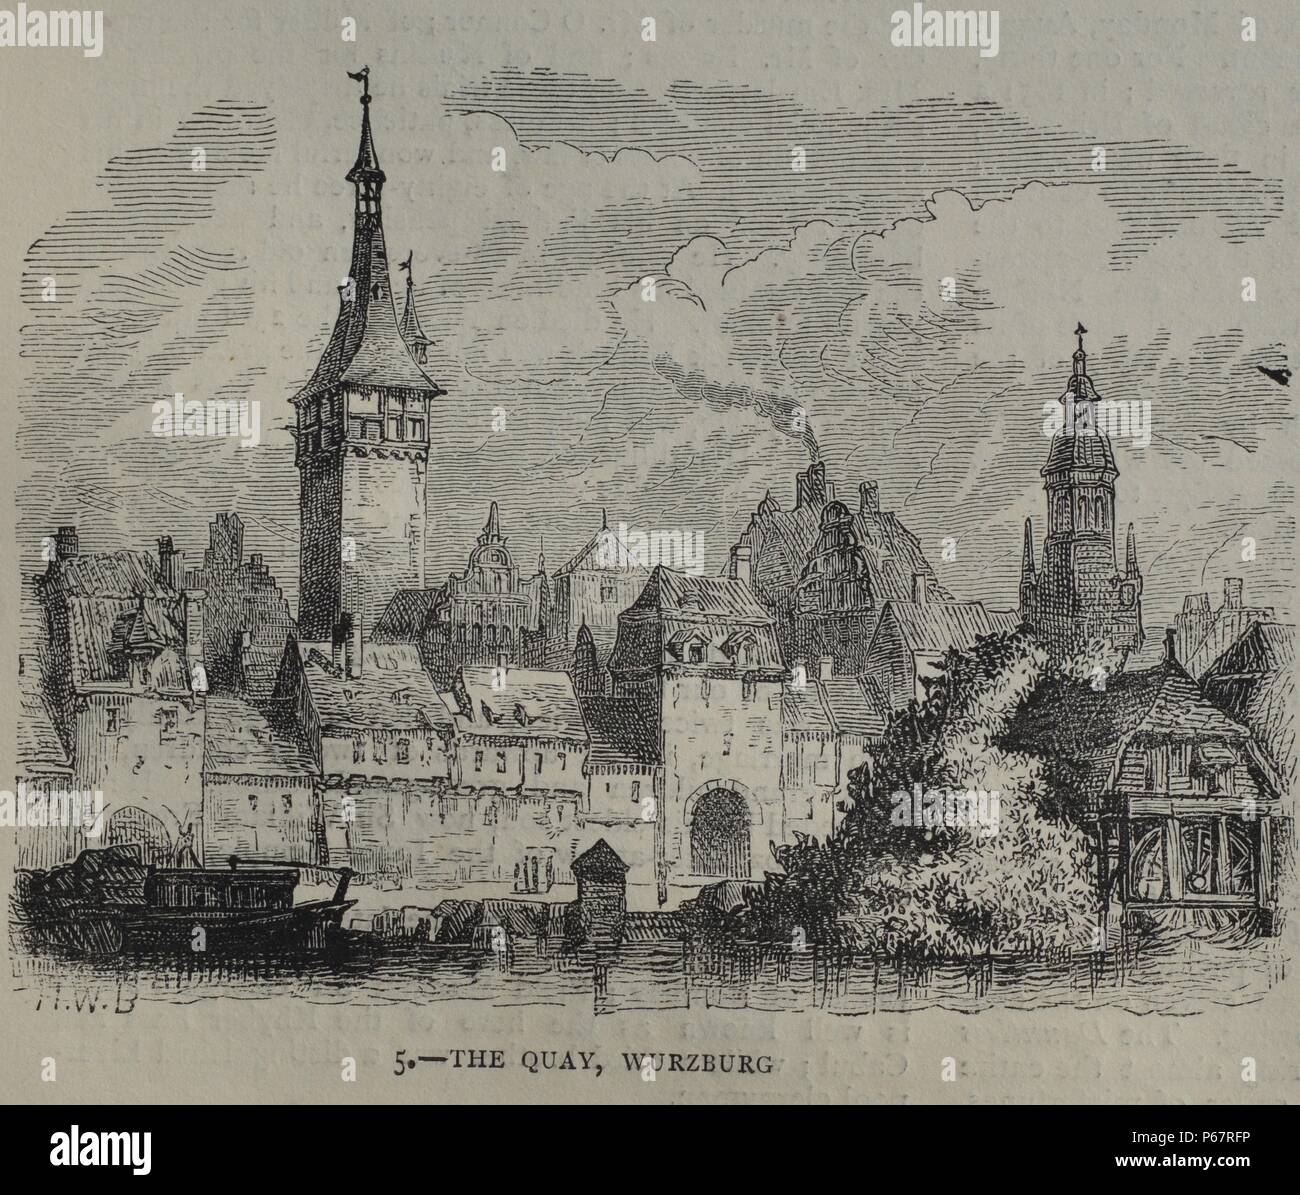 Engraving of the Quay in Würzburg a city in the region of Franconia, Northern Bavaria, Germany. Dated 1870 Stock Photo